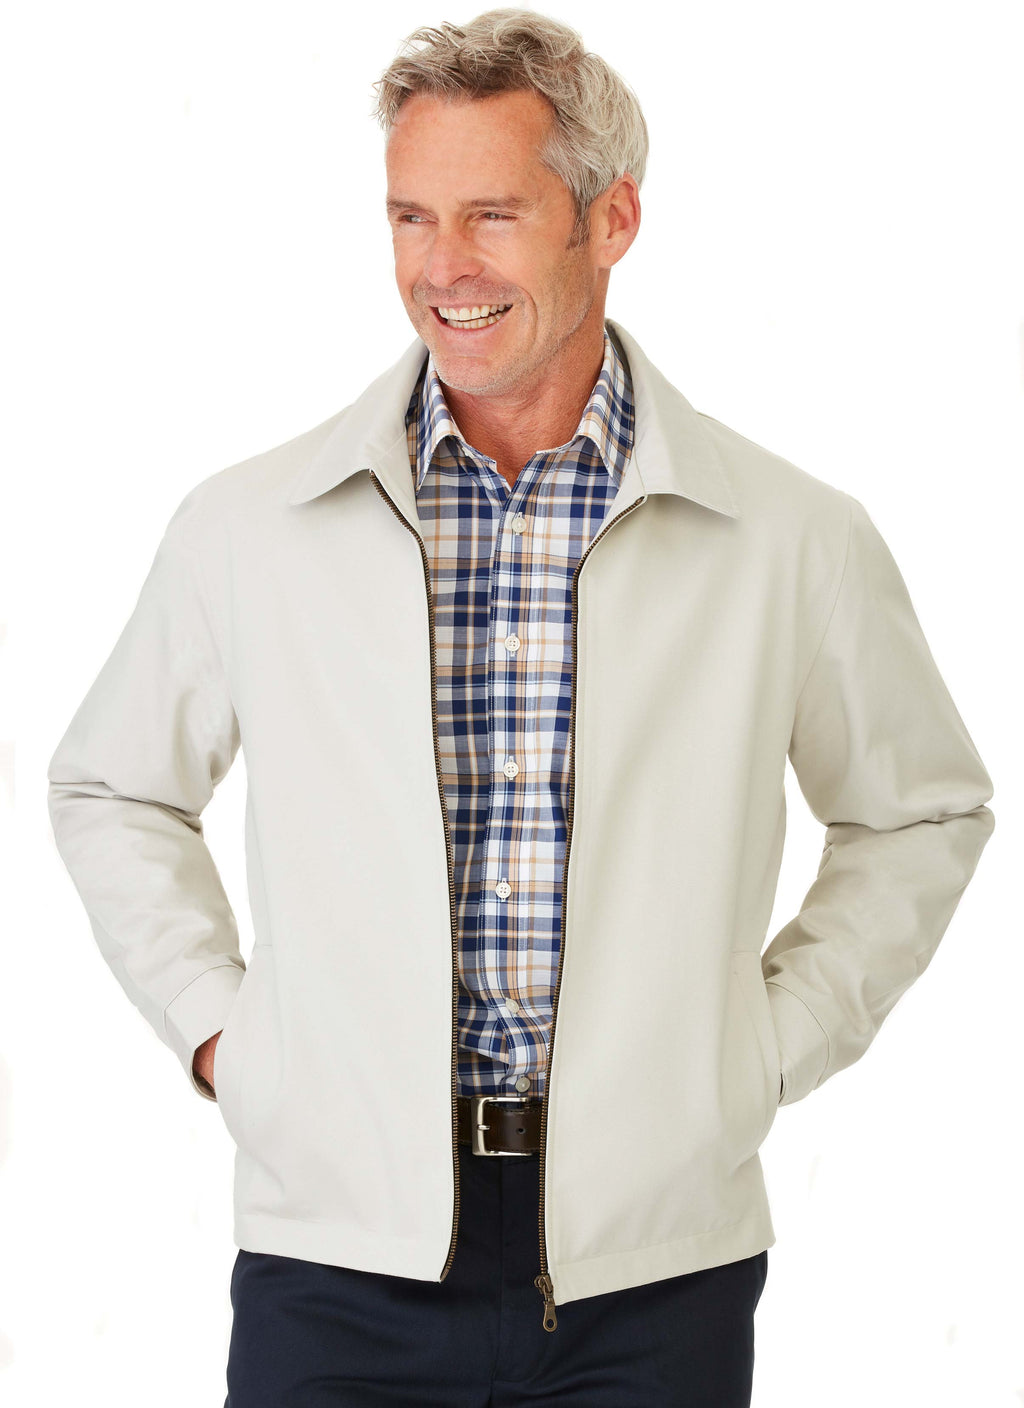 COTTER CASUAL JACKET STONE